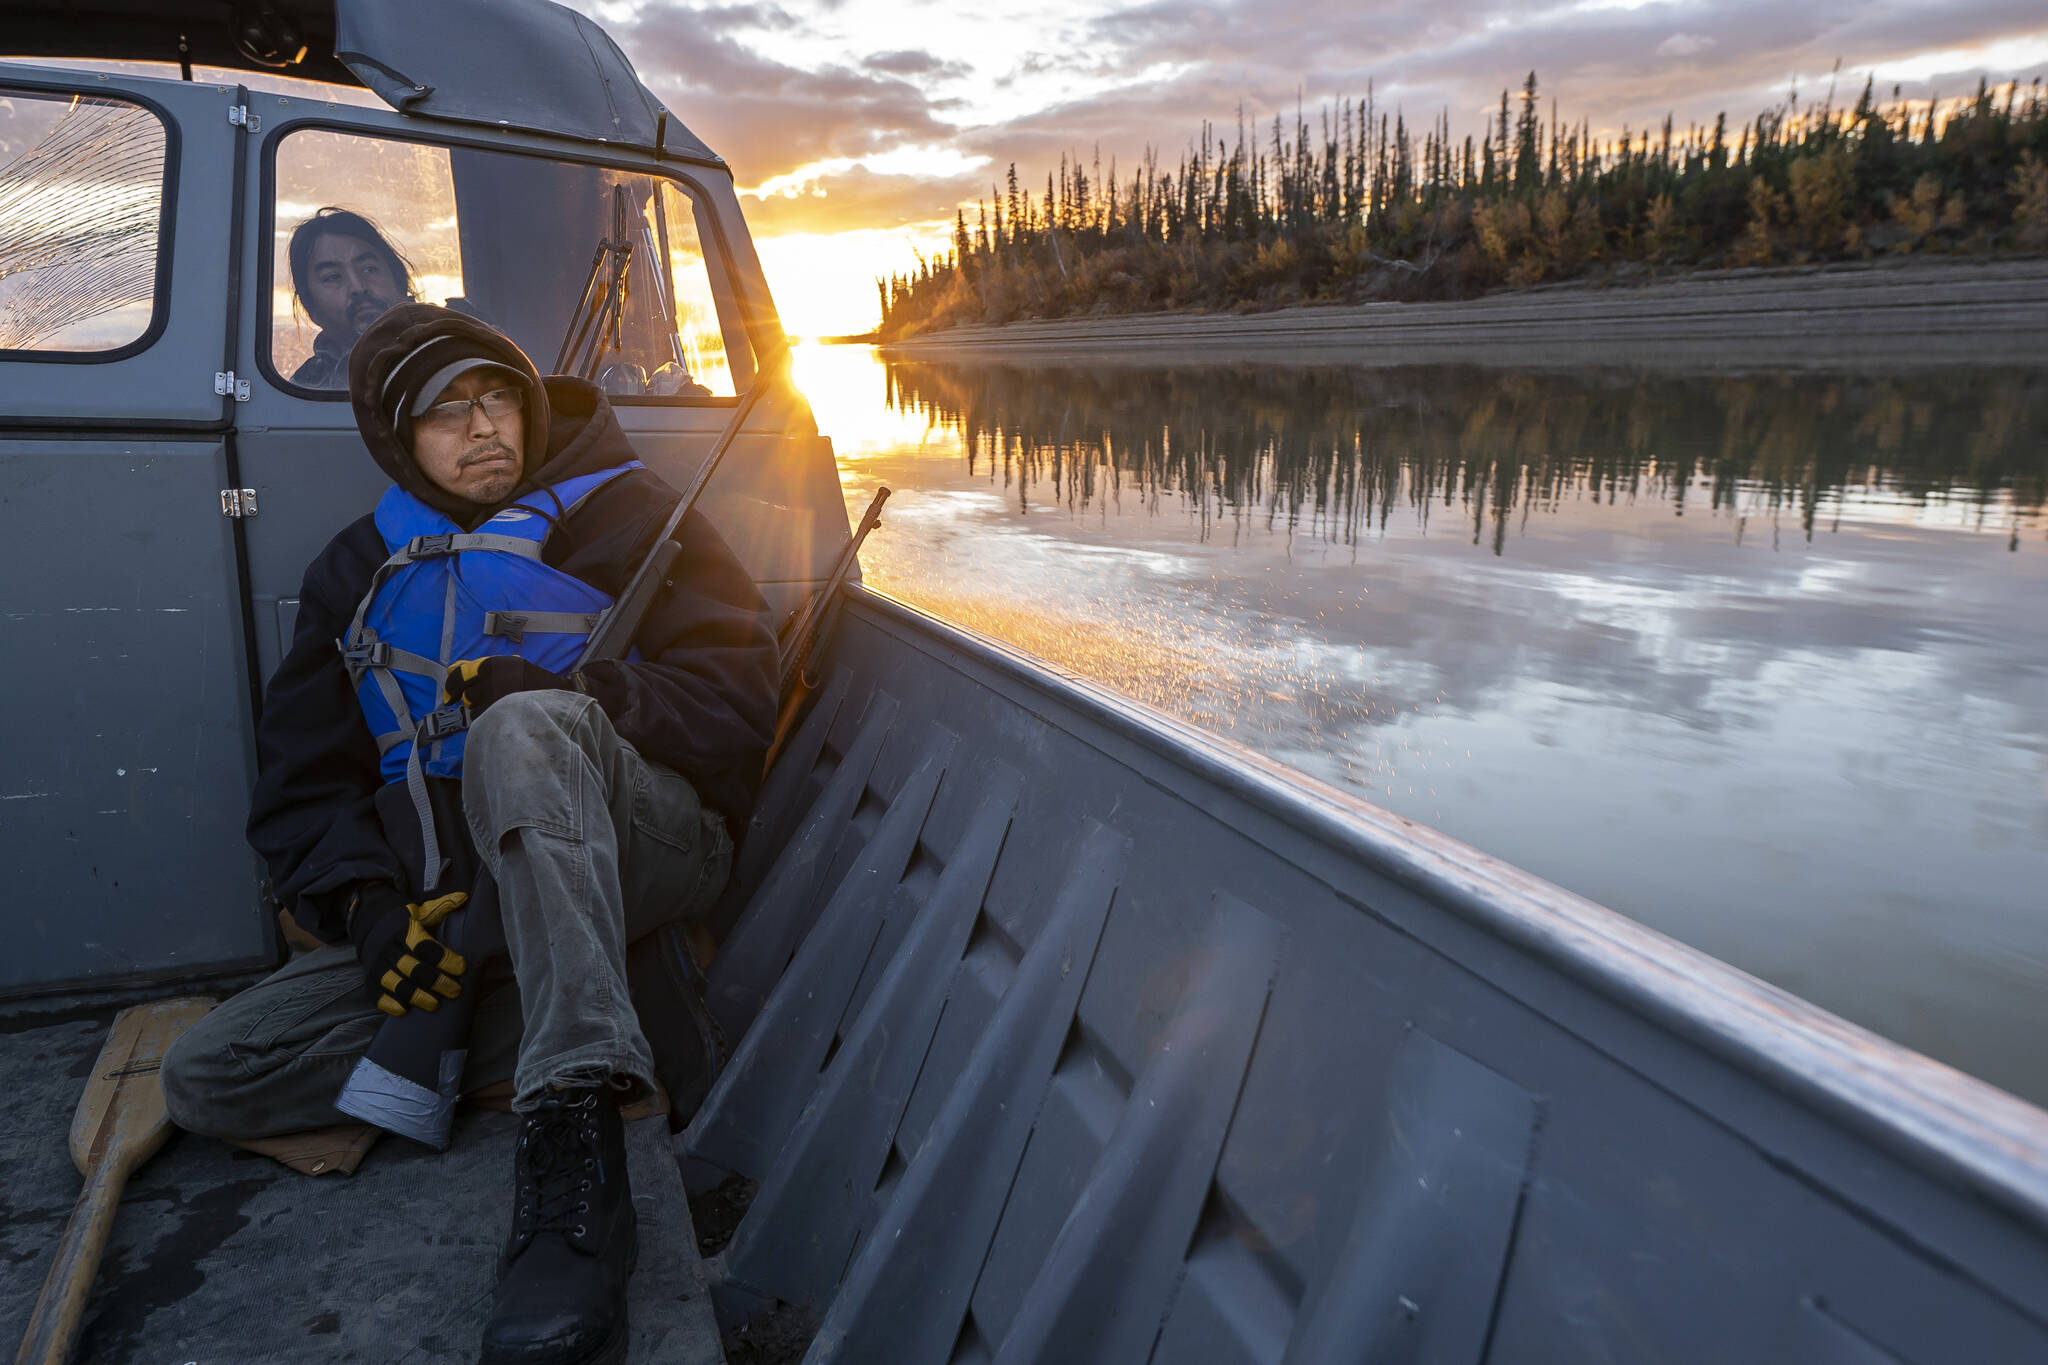 Michael Williams scans the shoreline for moose while traveling up the Yukon River on Tuesday, Sept. 14, 2021, near Stevens Village, Alaska. For the first time in memory, both king and chum salmon have dwindled to almost nothing and the state has banned salmon fishing on the Yukon. The remote communities that dot the river and live off its bounty are desperate and doubling down on moose and caribou hunts in the waning days of fall. (AP Photo/Nathan Howard)